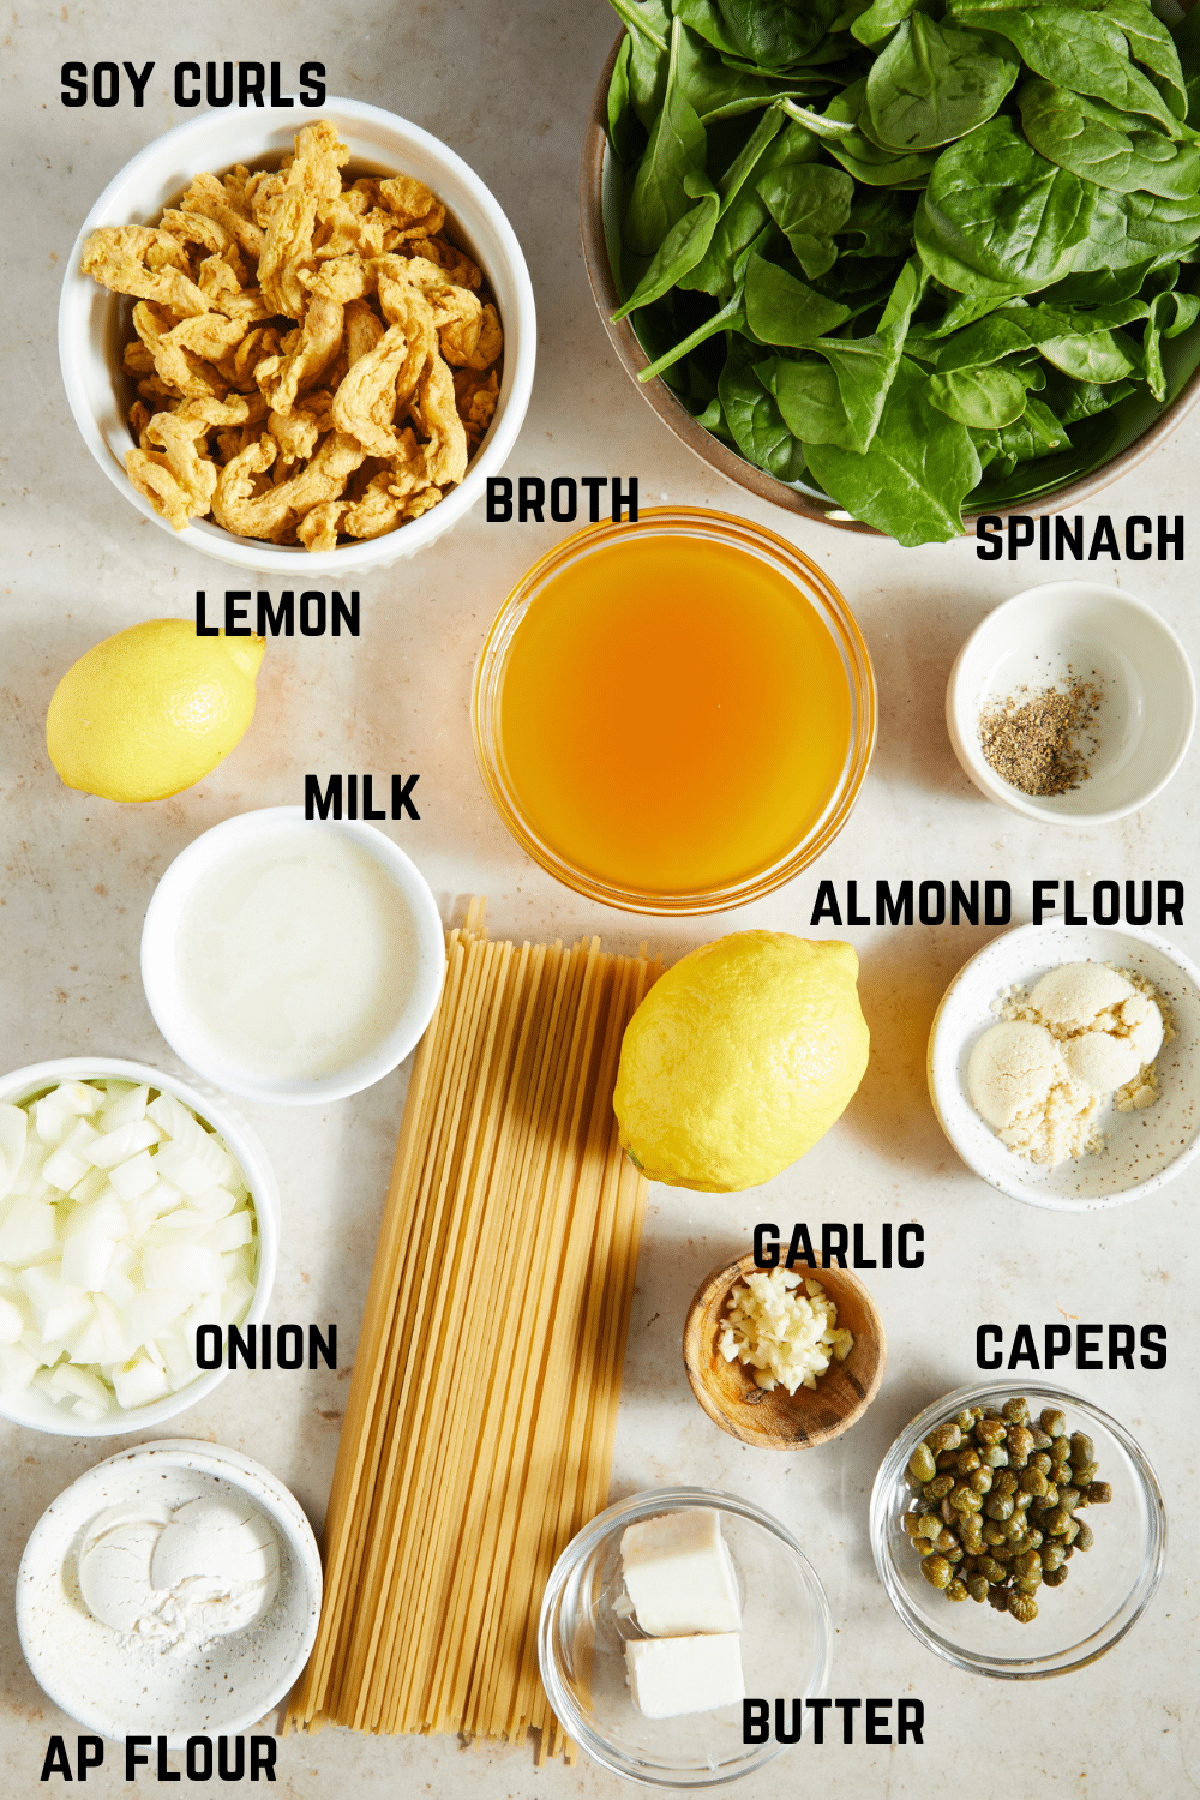 Overhead view of ingredients to make vegan chicken piccata: soy curls, spinach, lemons, broth, spices, almond flour and AP flour, milk, garlic, onion, capers, pasta noodles, and butter.